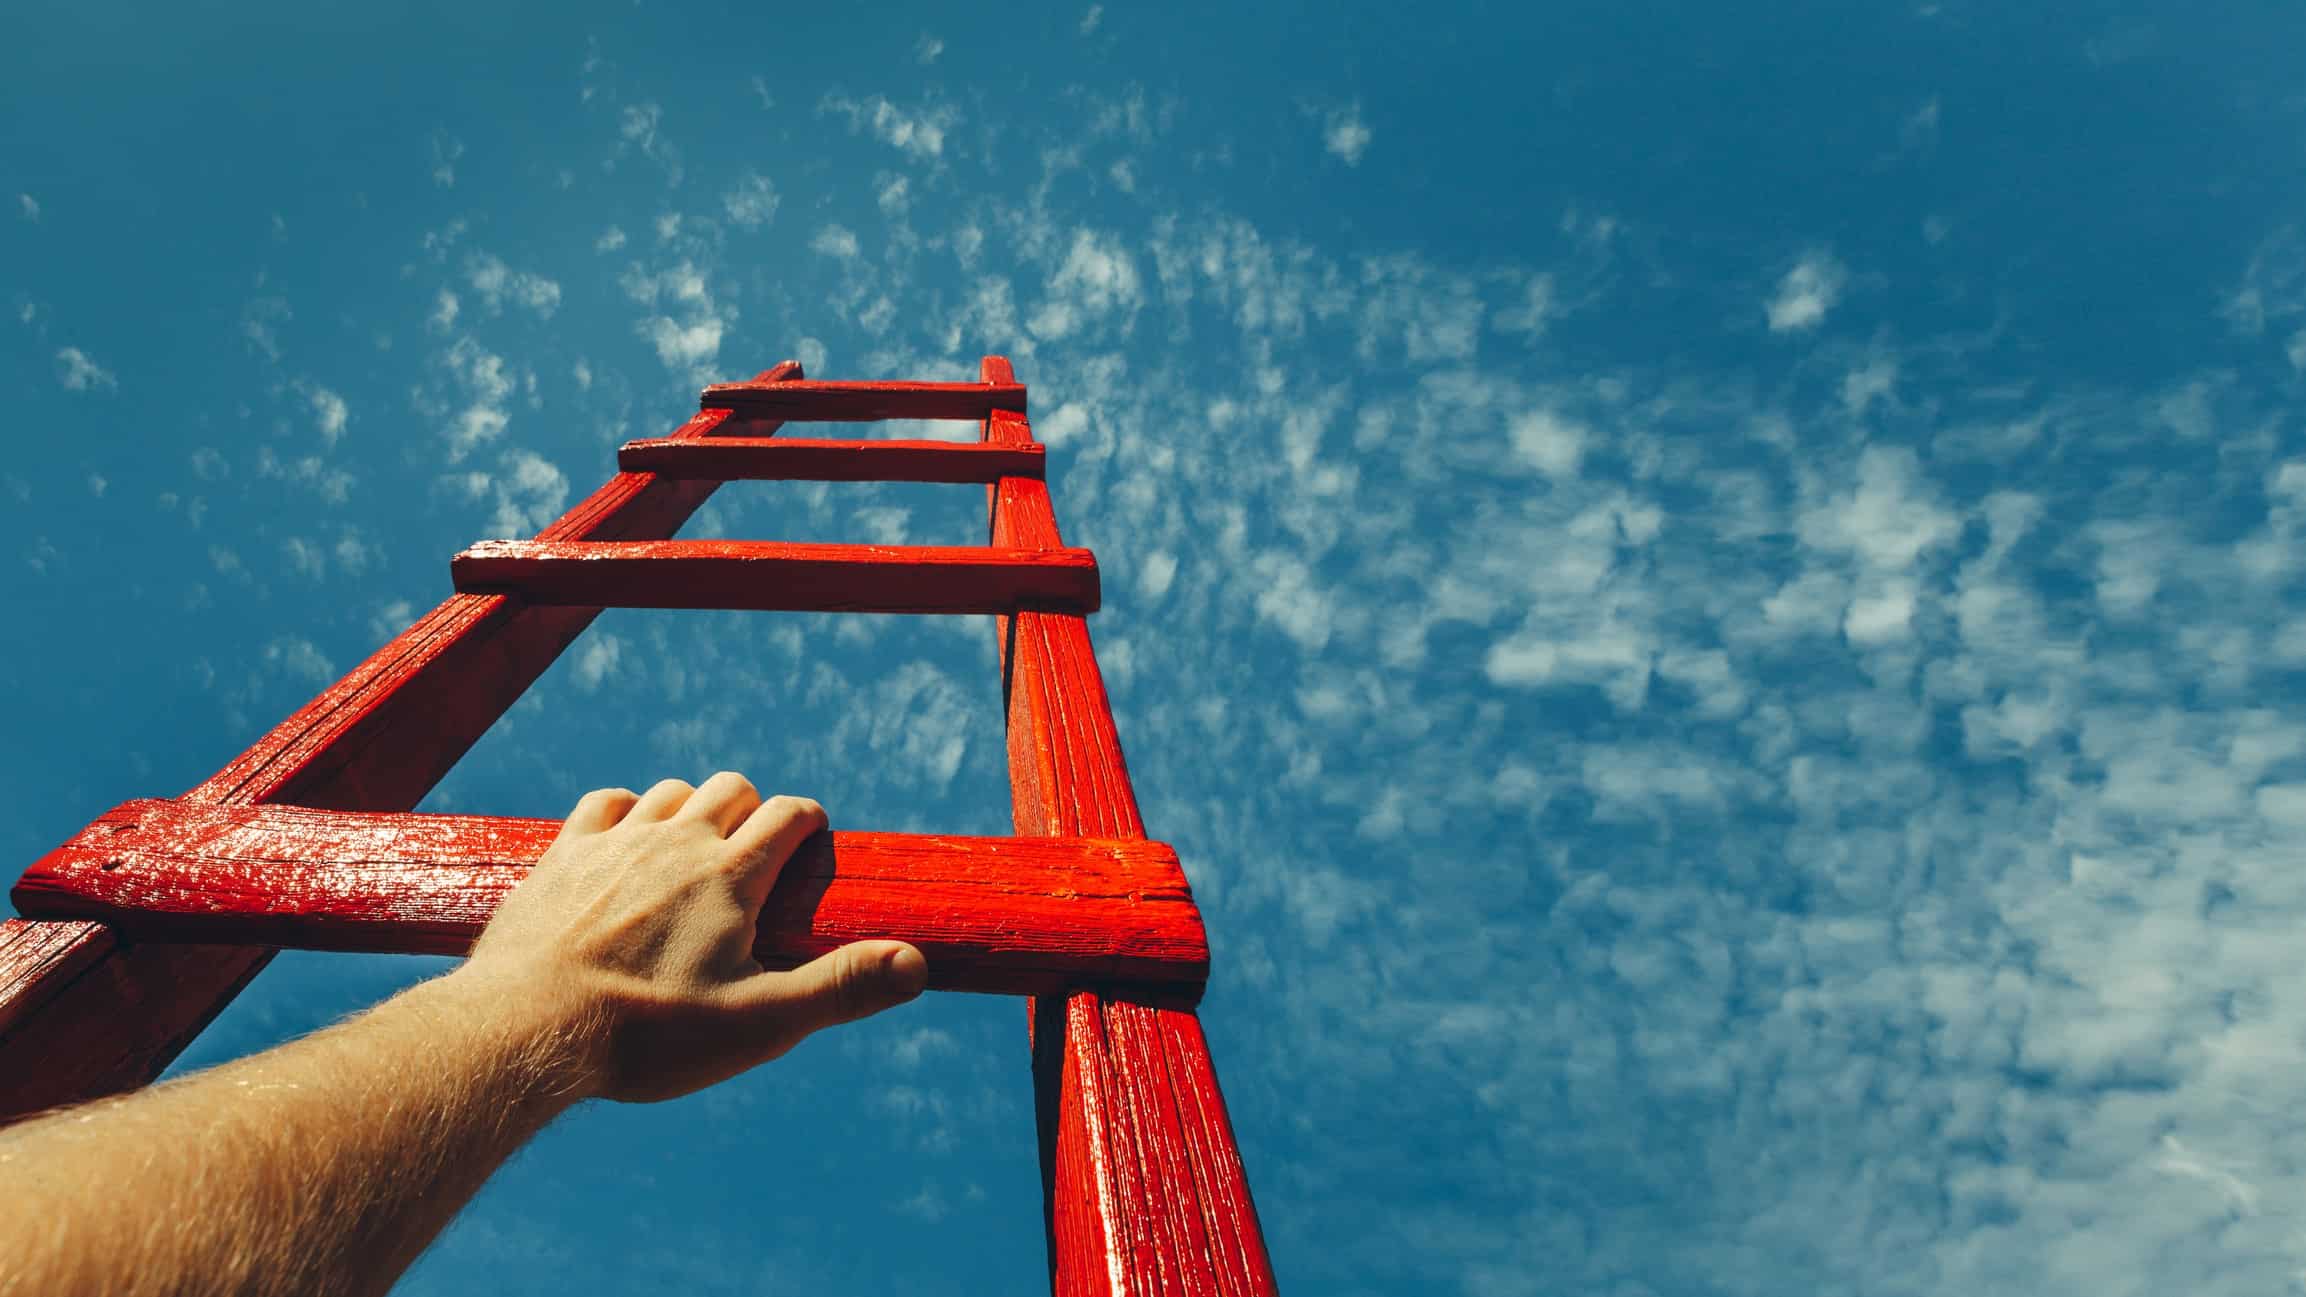 Hands grabbing for high rung on a ladder pointing to the sky